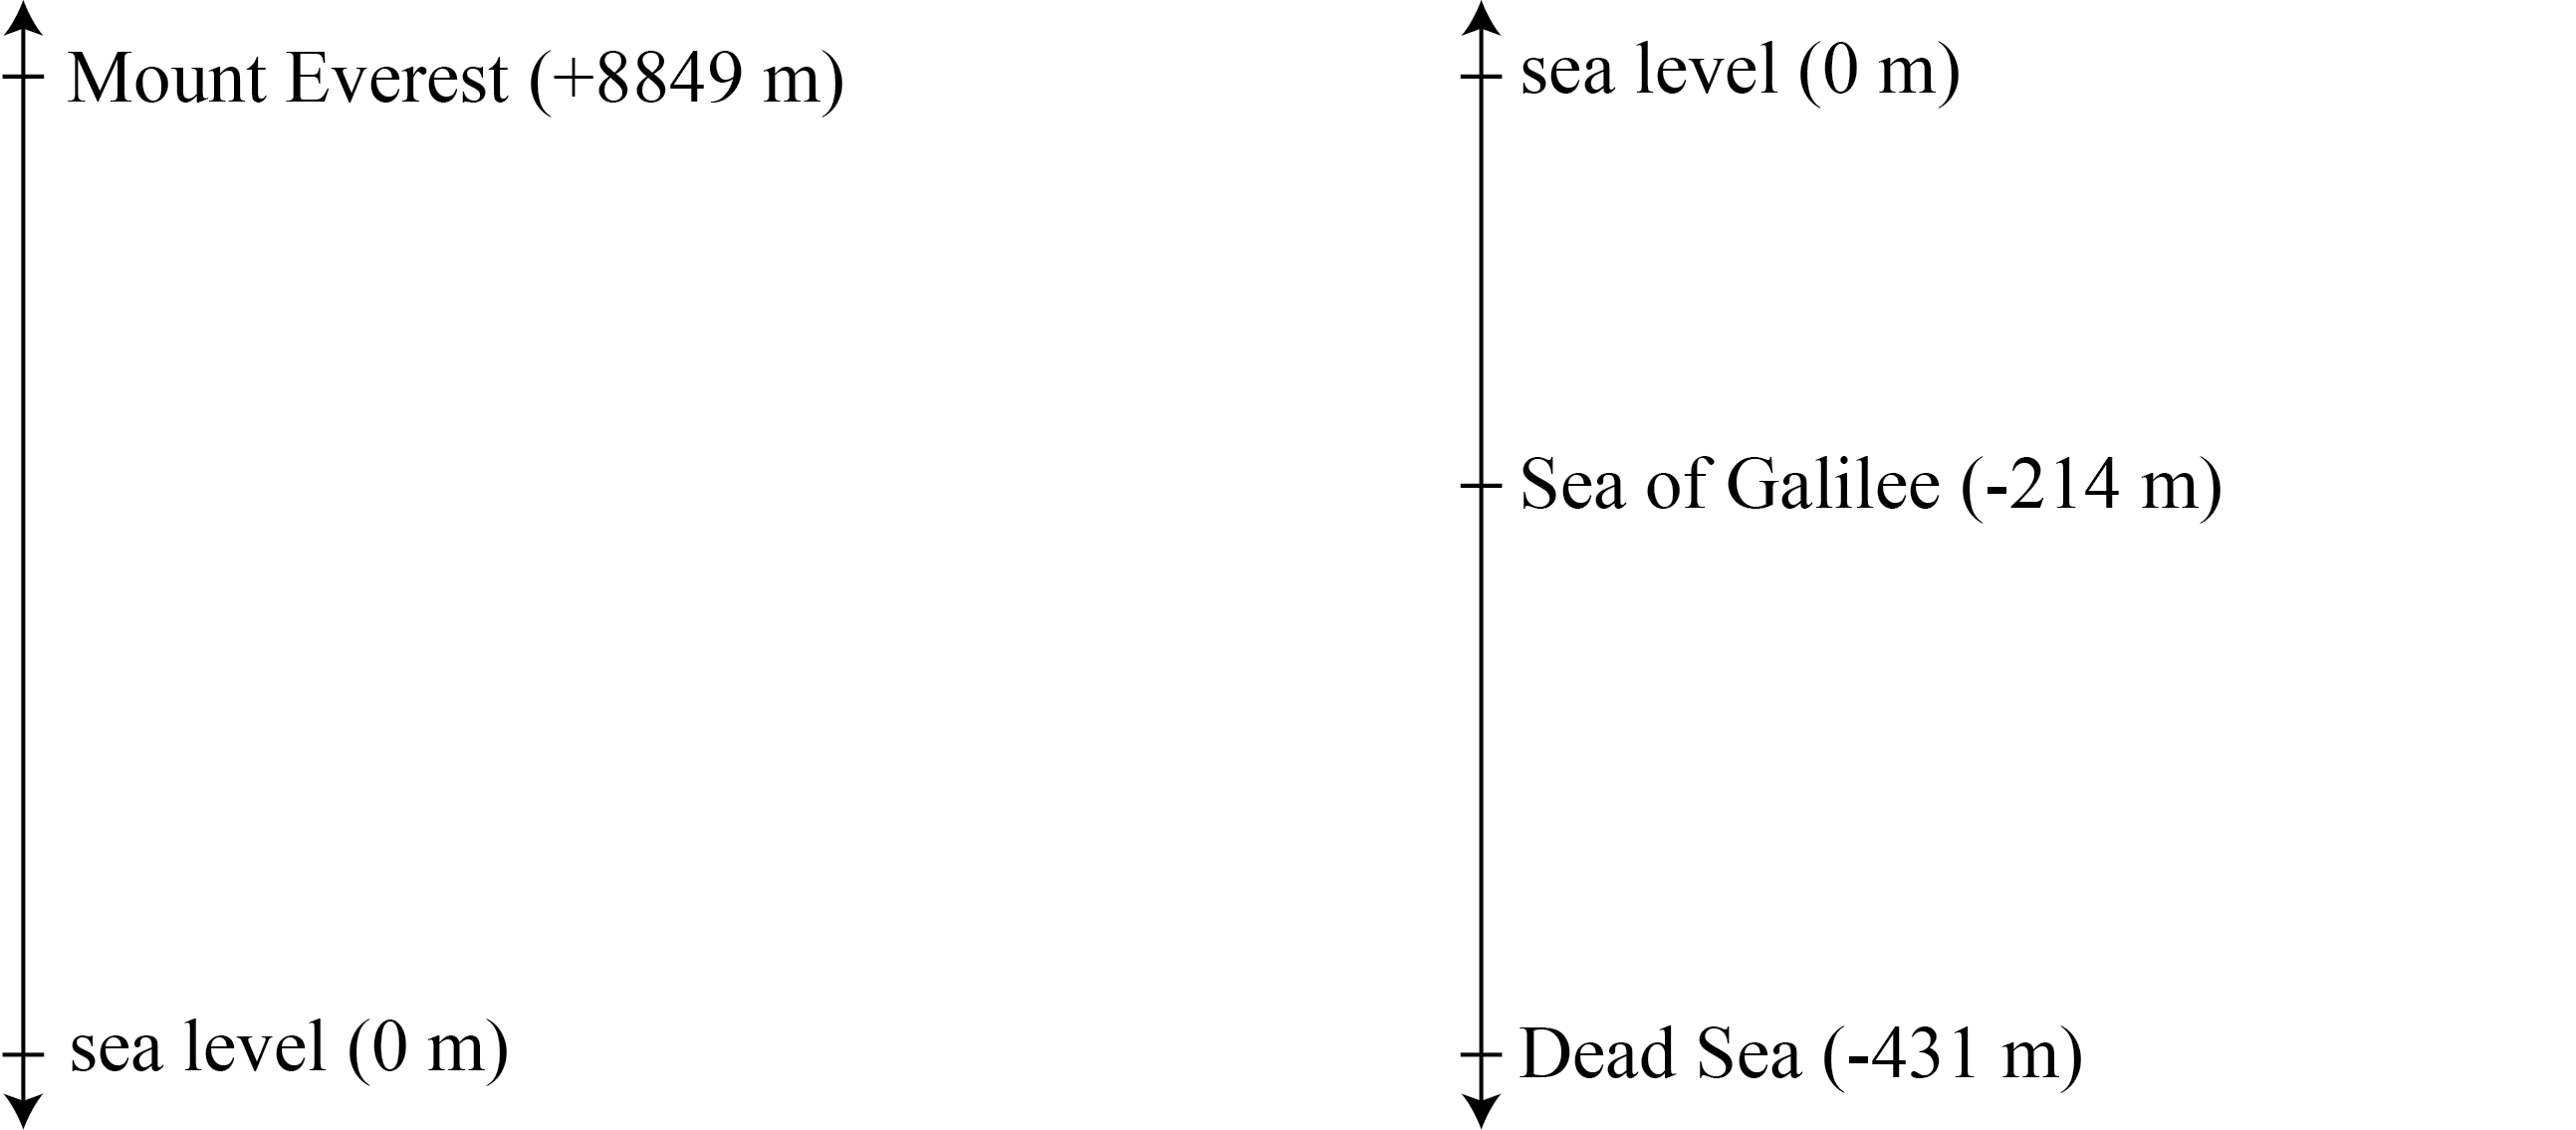 Two vertical number lines. On the first number line, there is a tick mark at the bottom labelled sea level (0 m), and tick mark at the top labelled Mount Everest (plus 8849 m). On the second line, there is a tick mark at the top labelled sea level (0 m), a tick mark at the bottom labelled Dead Sea (minus 431 m), and a tick mark just above the middle of the number line labelled Sea of Galilee (minus 214 m).